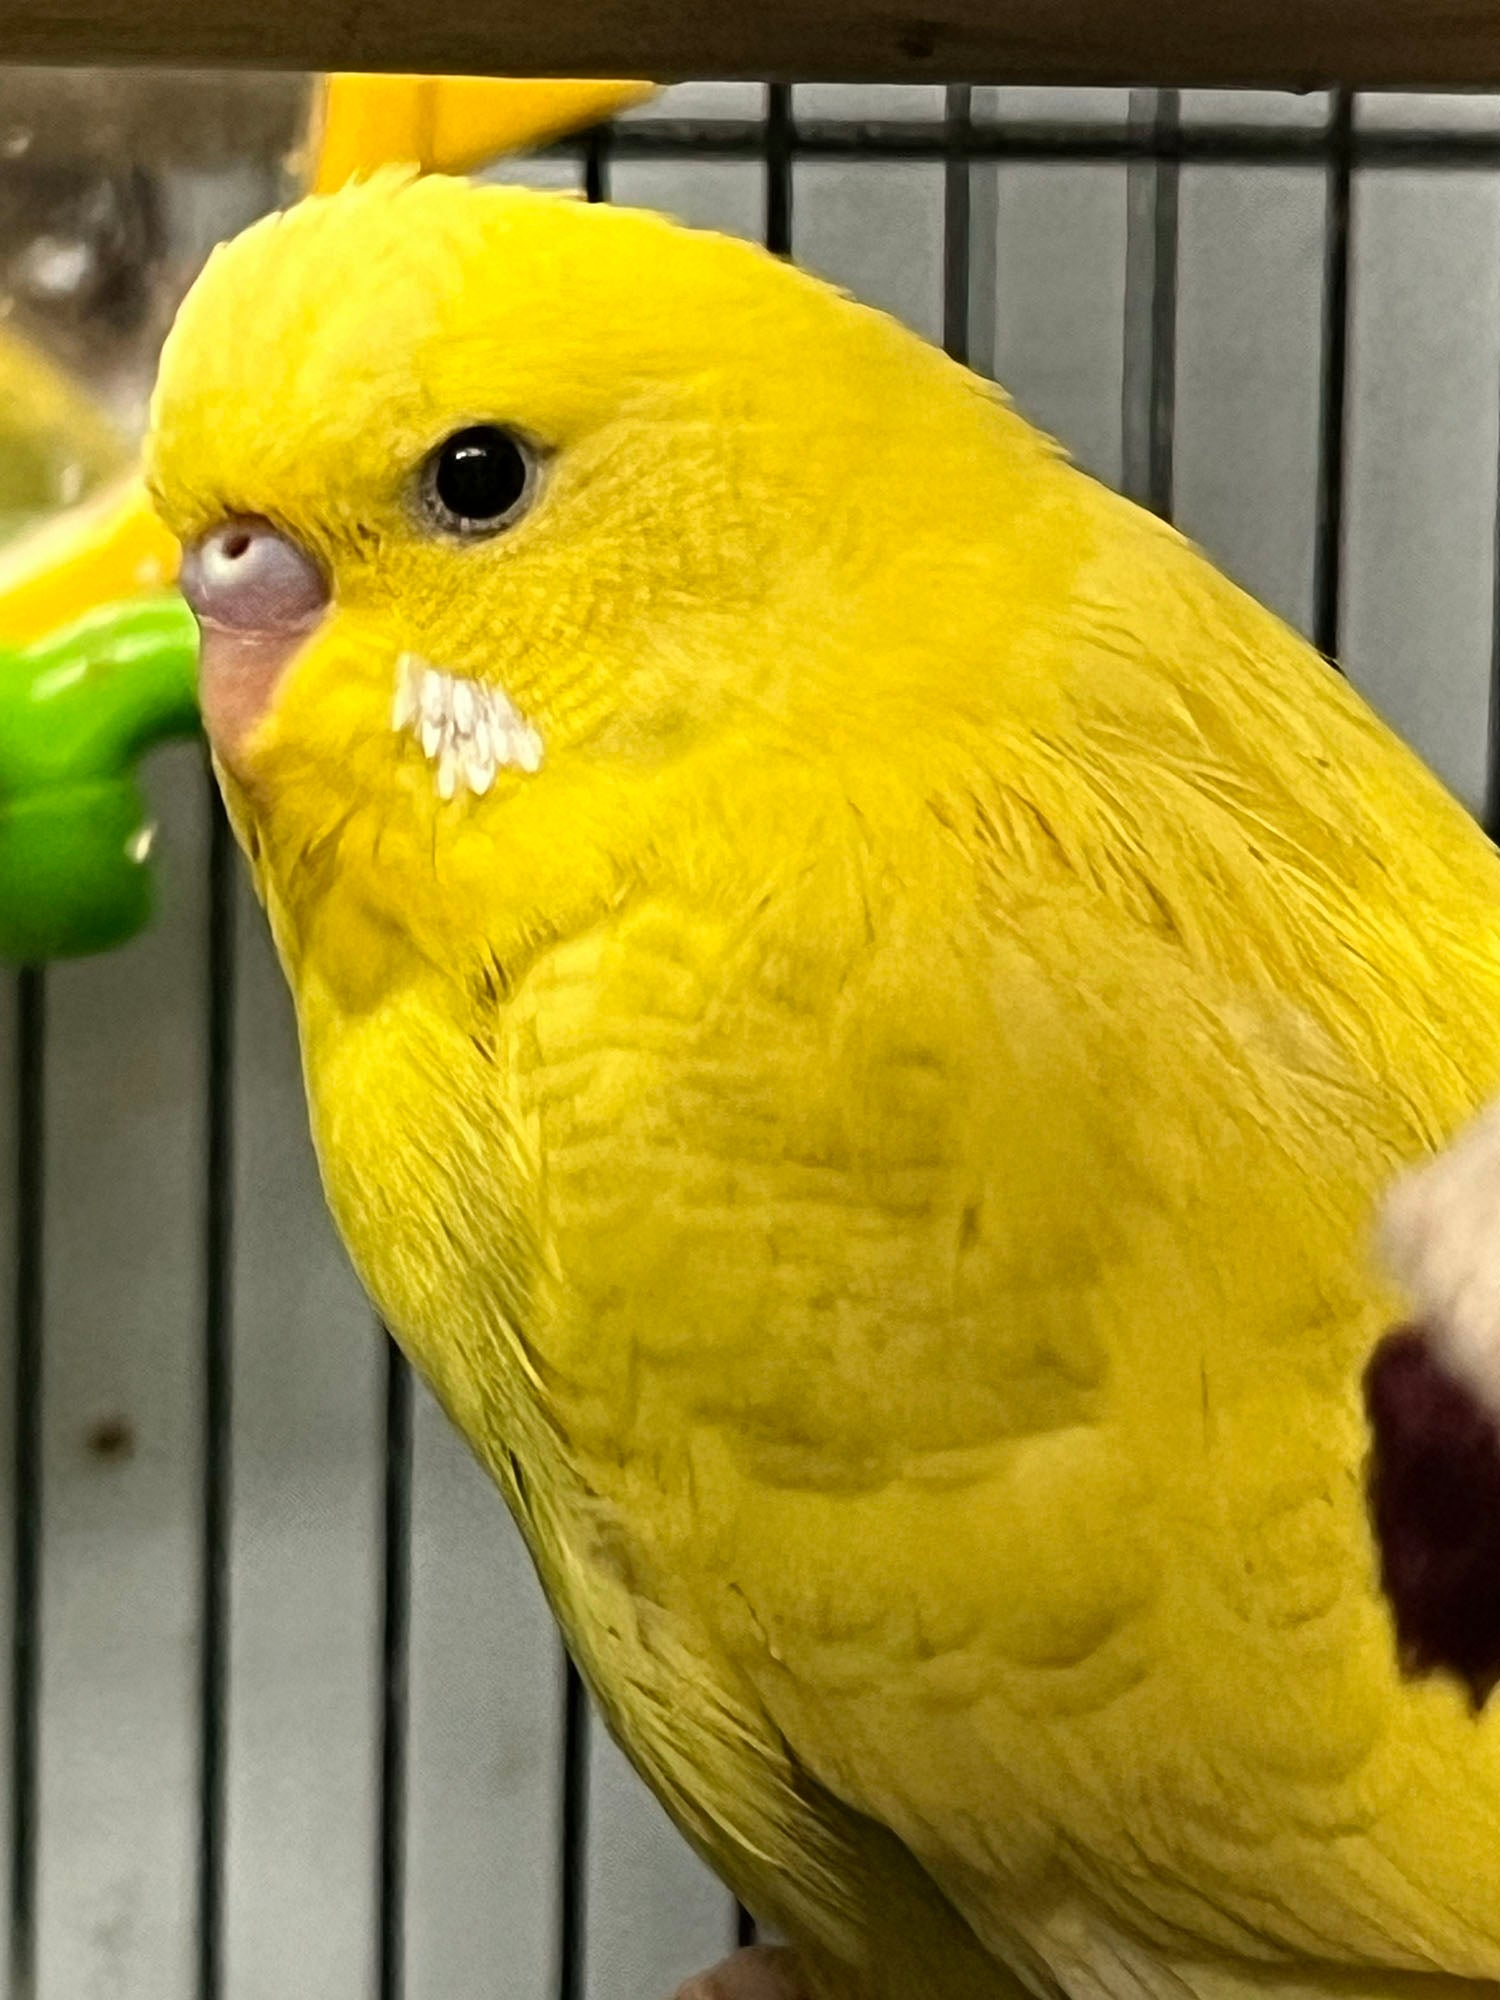 The Art of Budgie Care